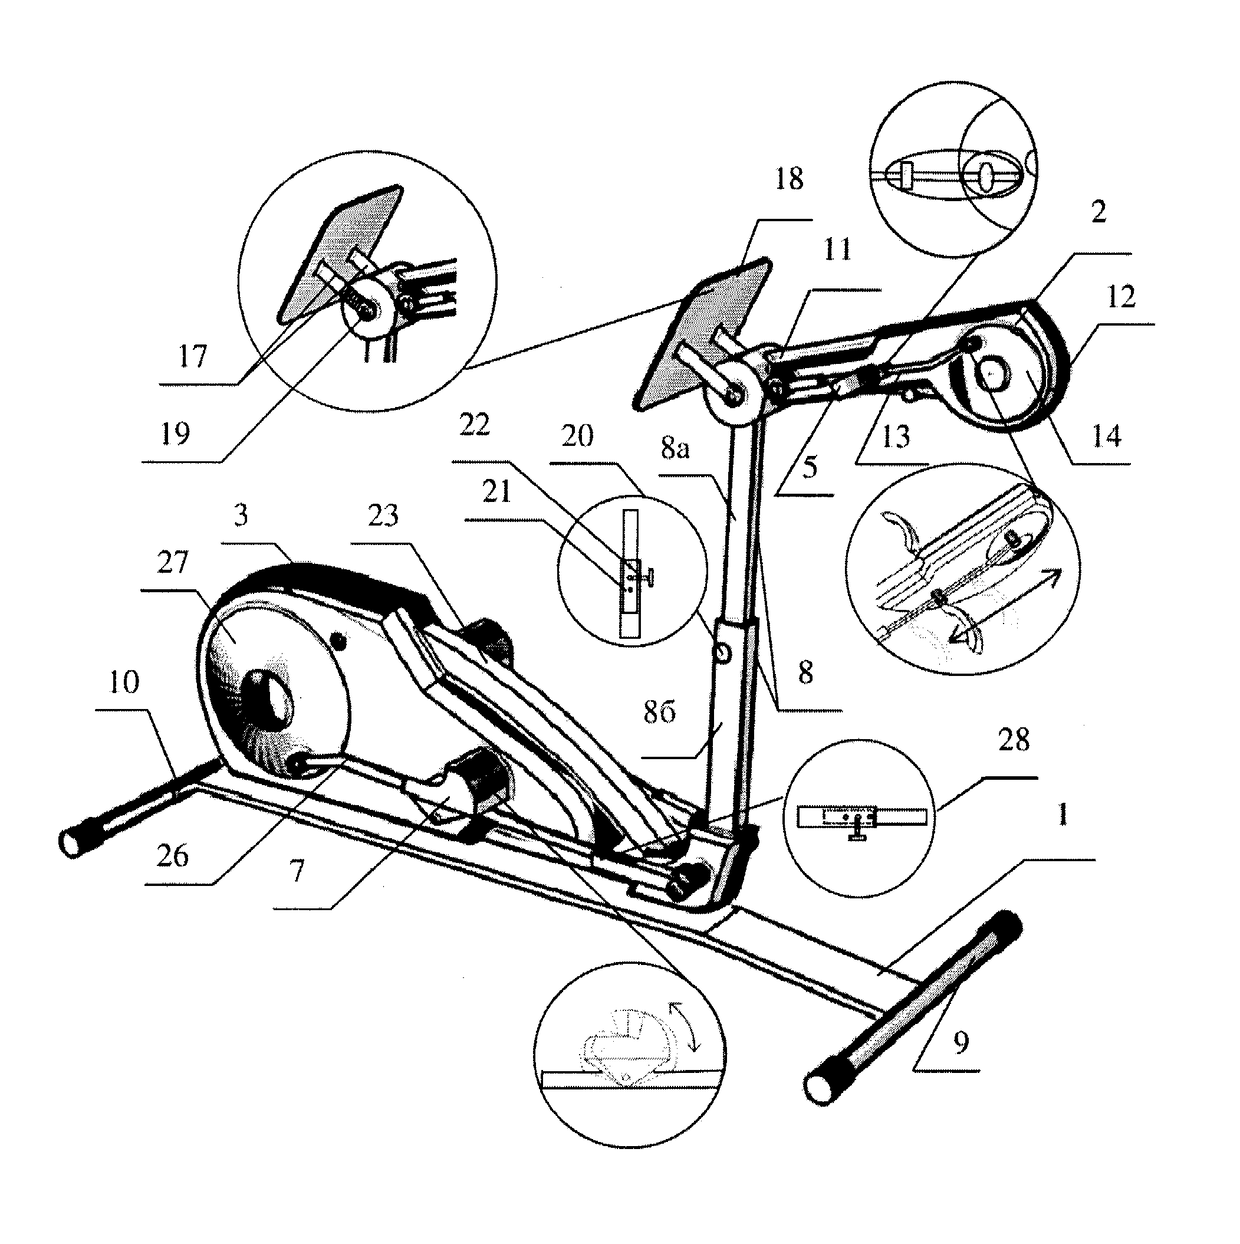 Elliptical exercise device for simultaneous training of shoulder girdle, pelvic girdle and trunk muscles in a human